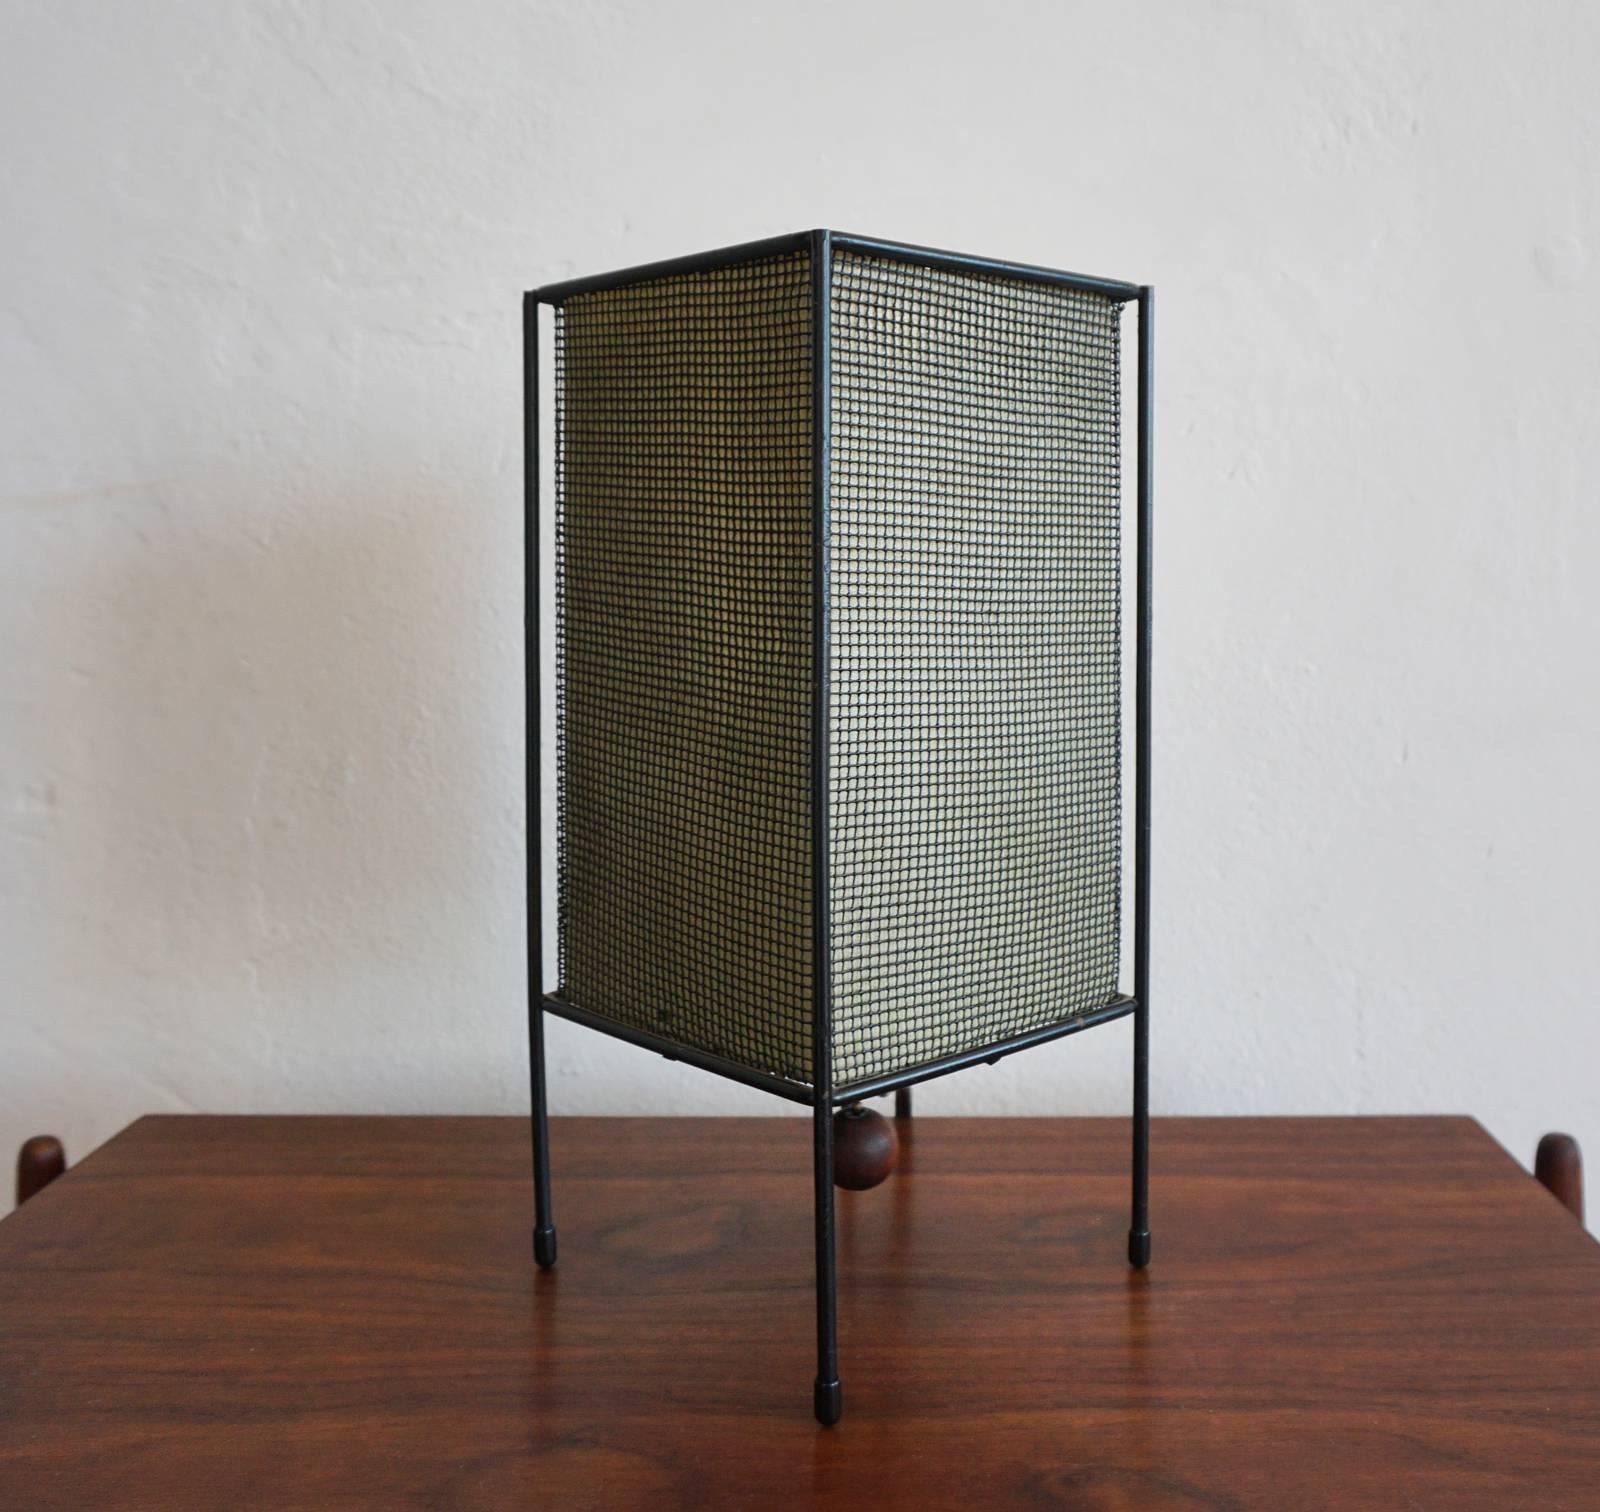 Lamp by Archie Kaplan for his company, designed for Moderns. Archie Kaplan and Sol Bloom were the designers at Designed for Moderns (later called New Dimensions). The company was located in New York City and was business between 1951 and 1954.

  